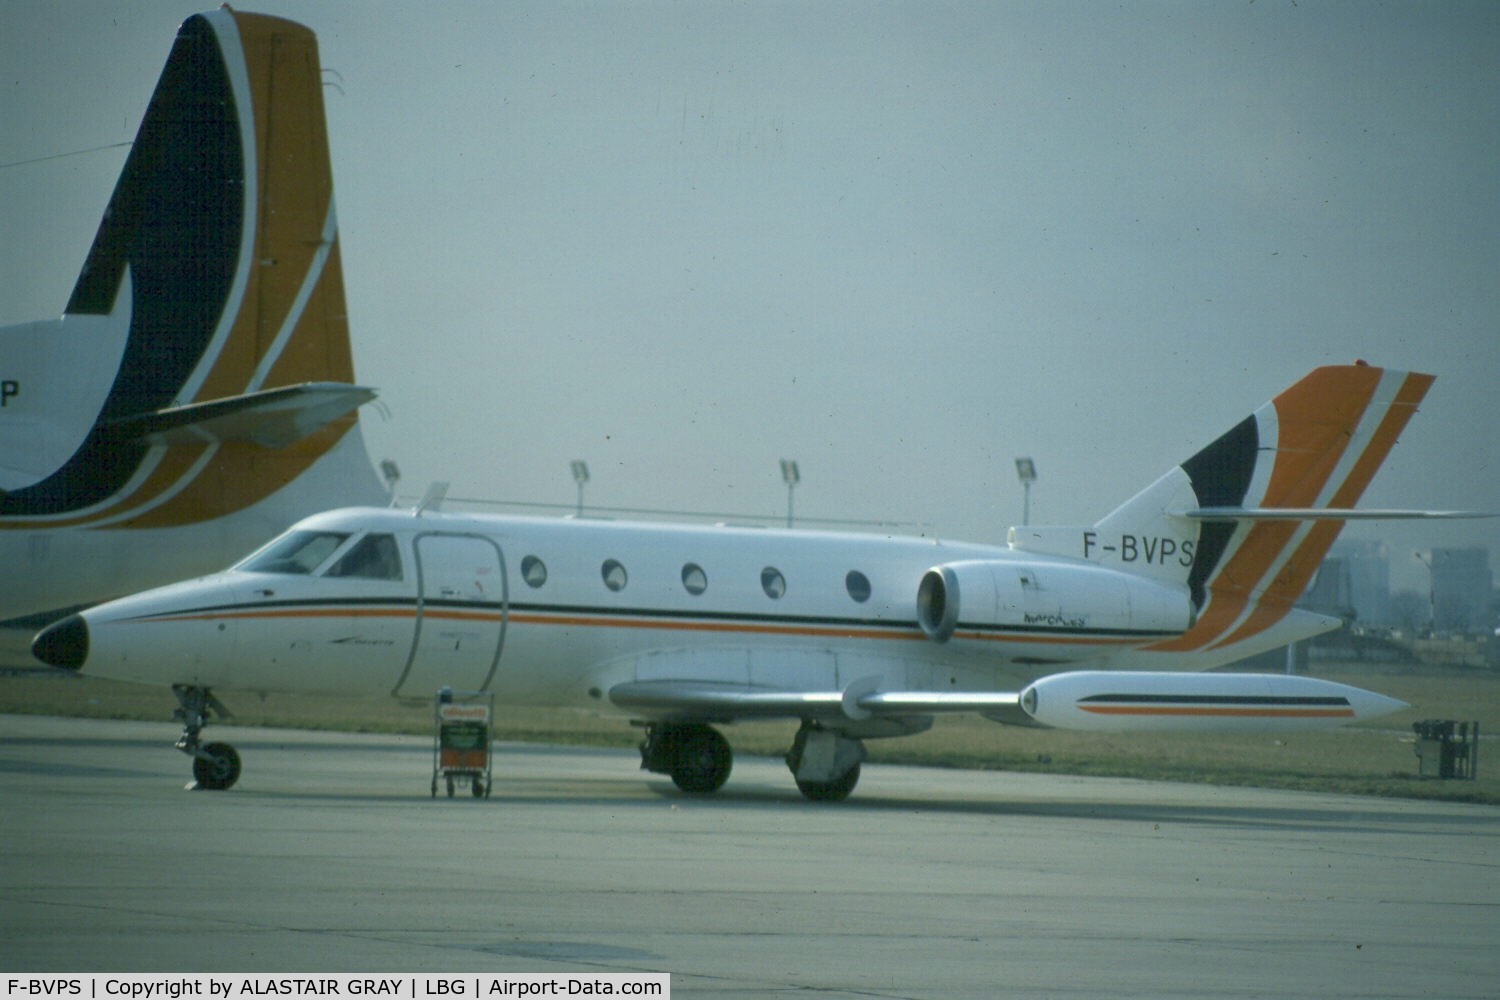 F-BVPS, Aerospatiale SN-601 Corvette C/N 14, Parked at le Bourget in front of a Uni Air F-27 in 1979